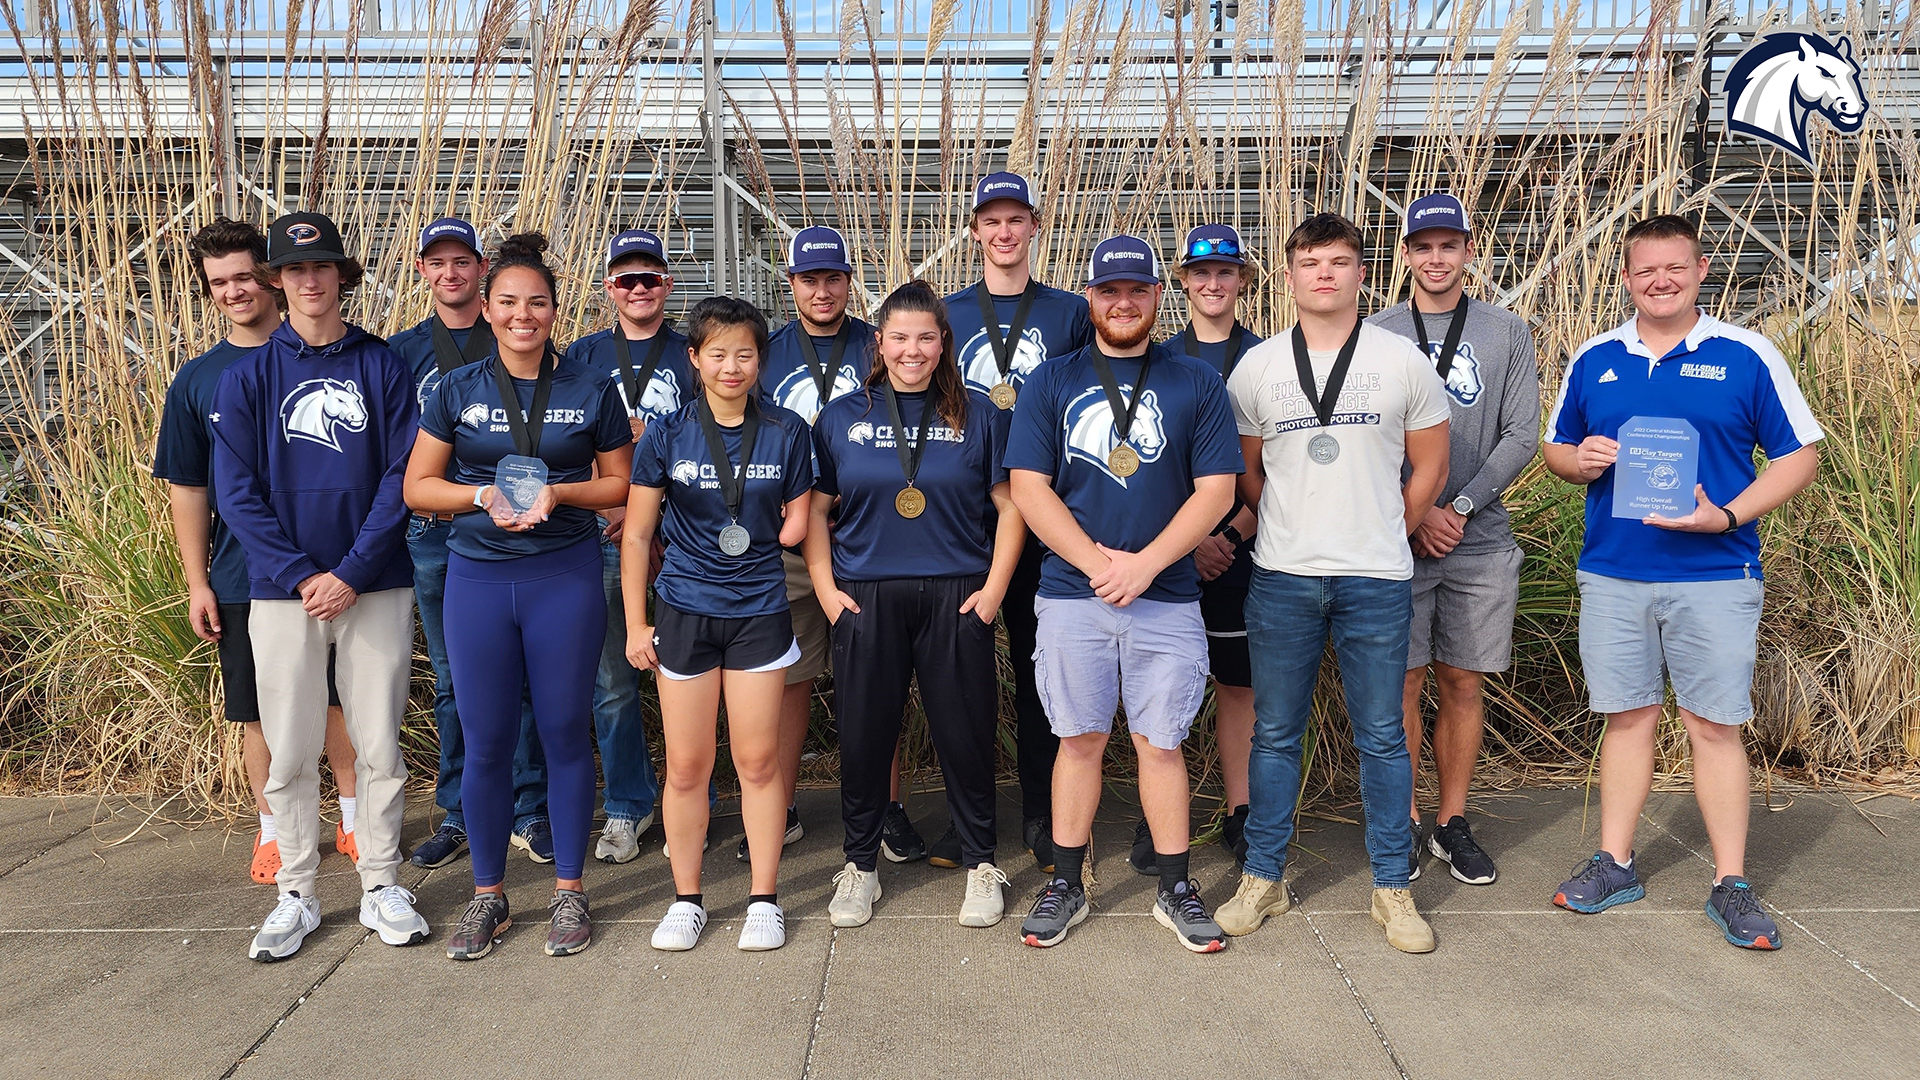 Chargers have strong showing at ACUI/SCTP Central Midwest Regional